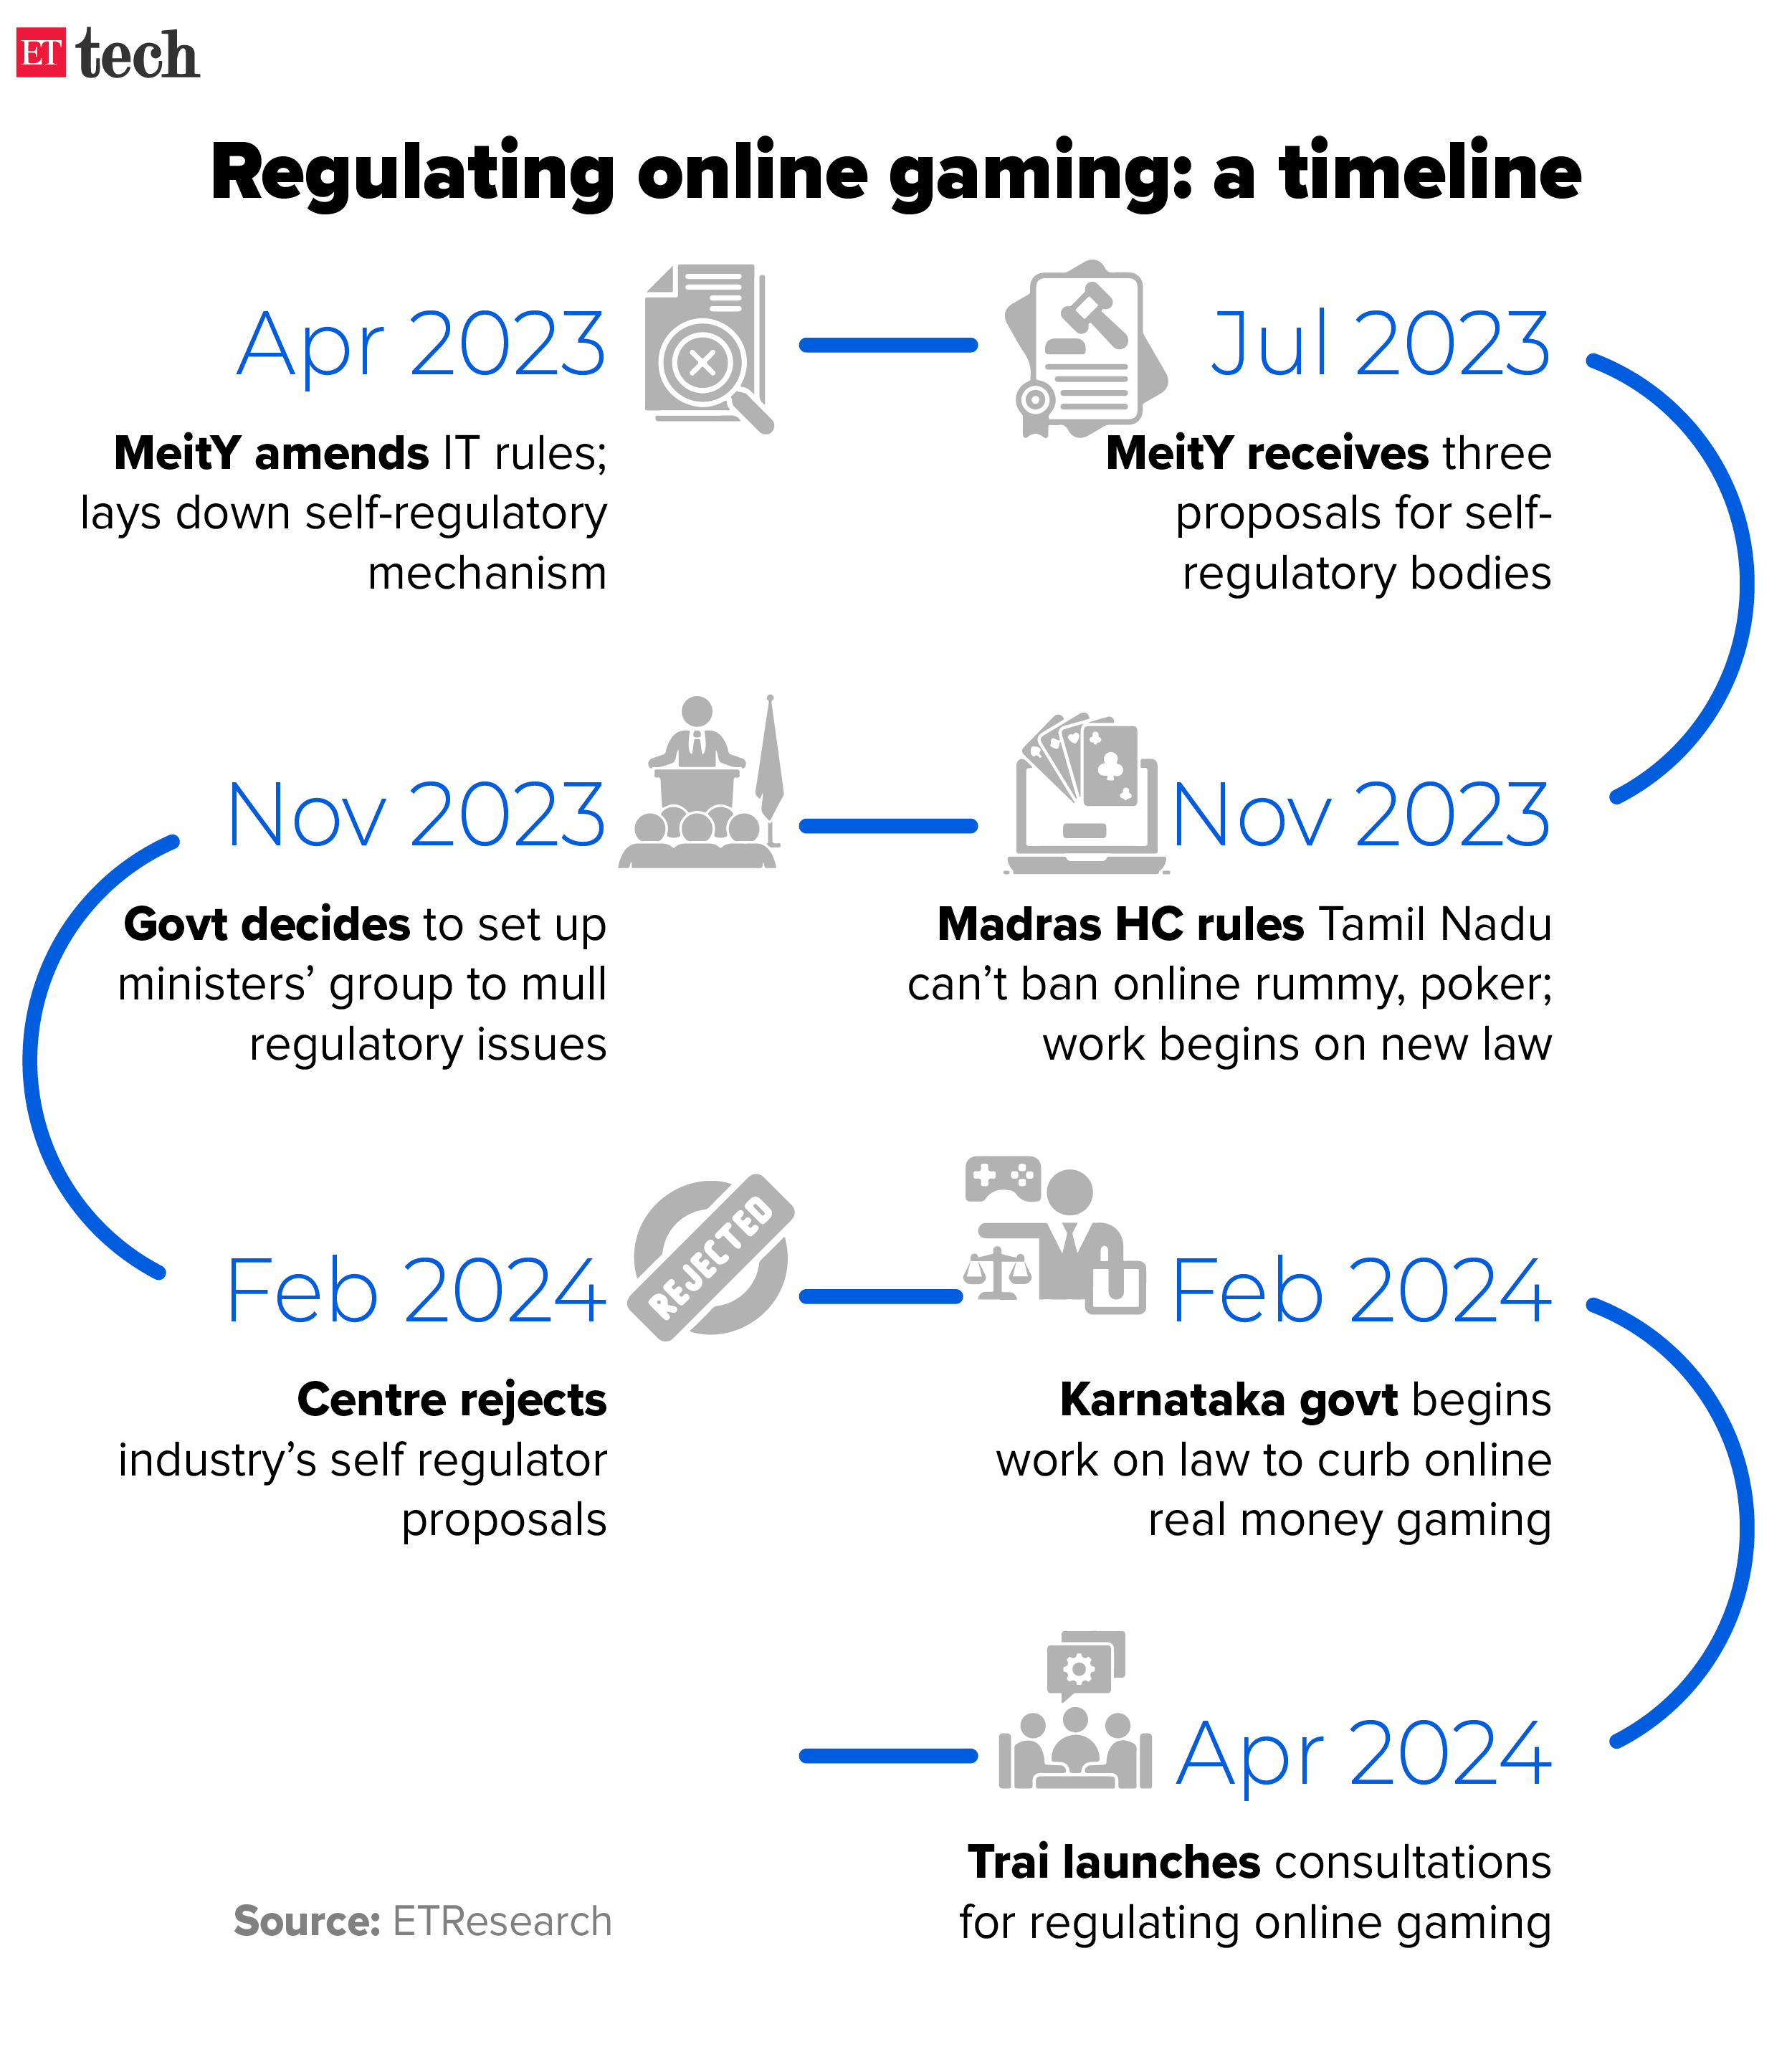 Regulating online gaming a_Timeline_MAY 2024_Graphic_ETTECH_1